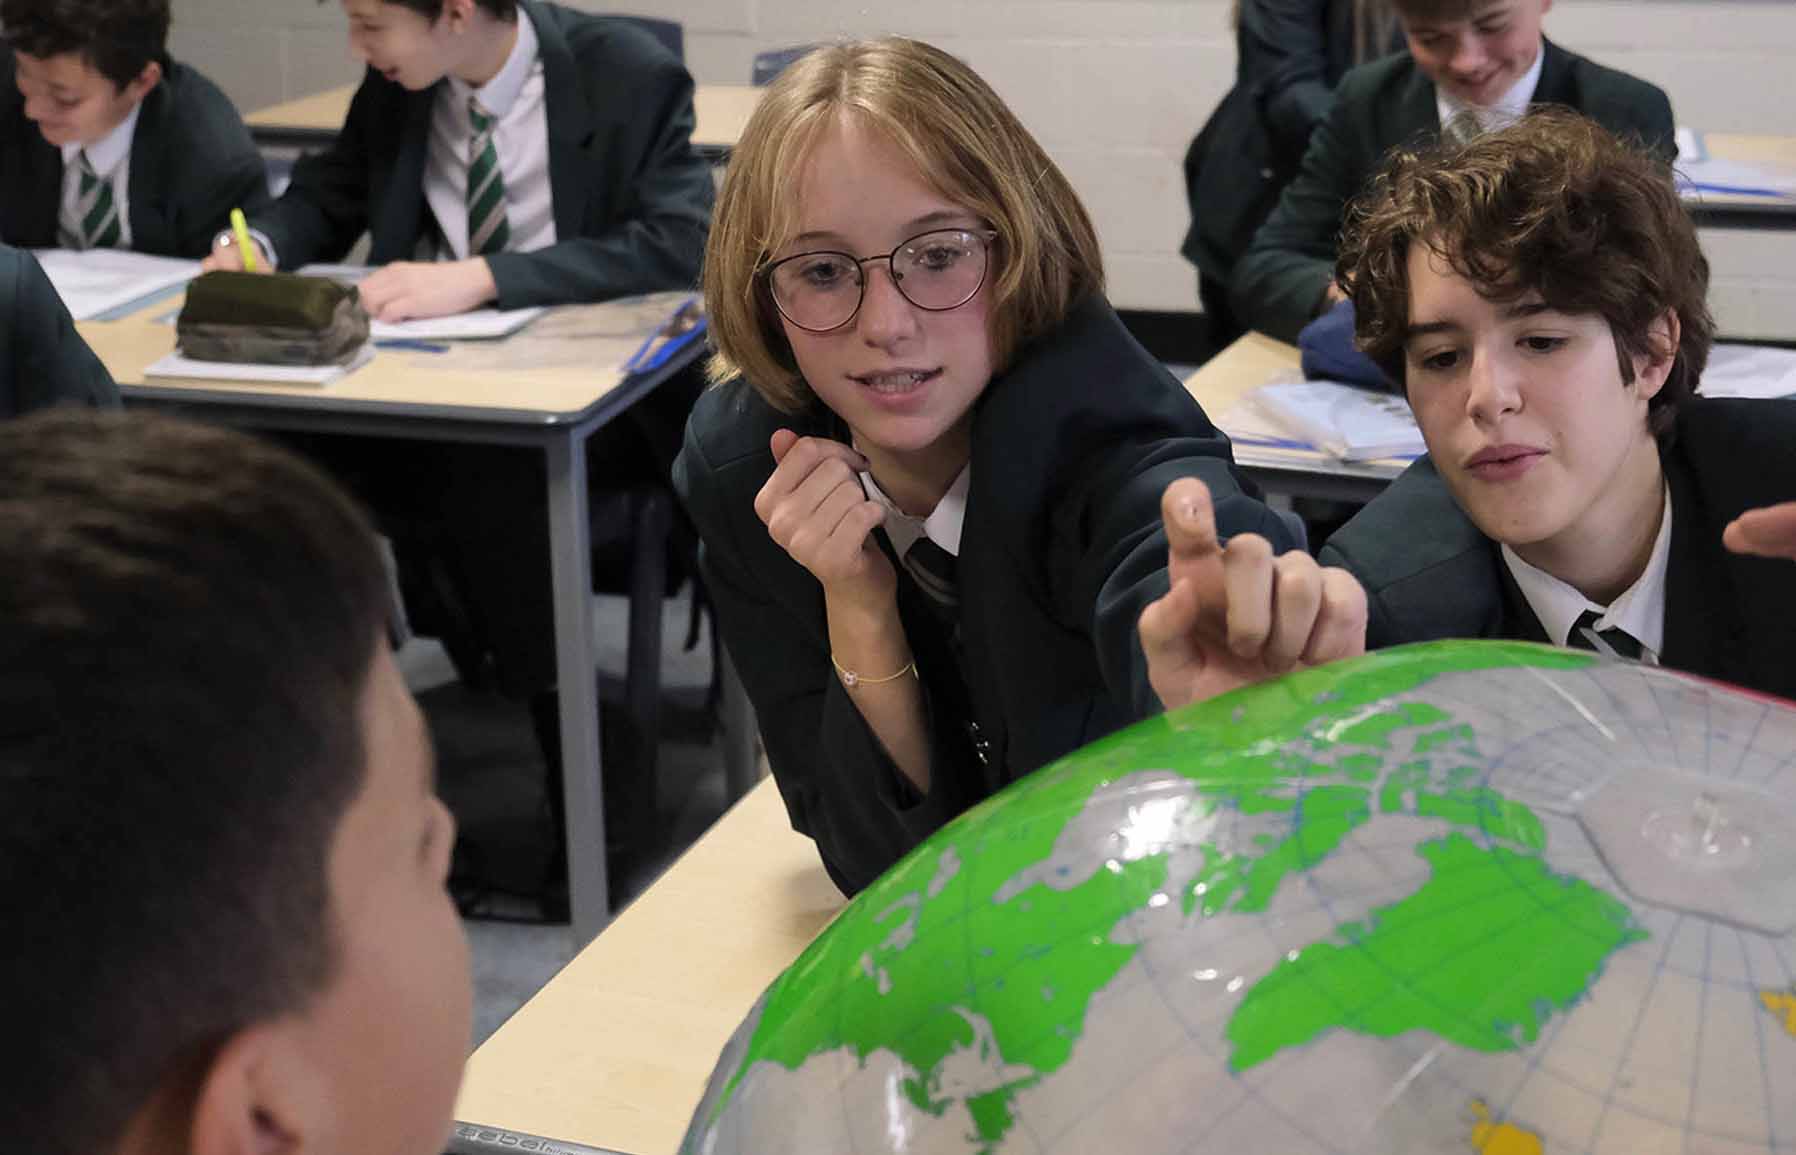 Students in a classroom looking at a large globe.